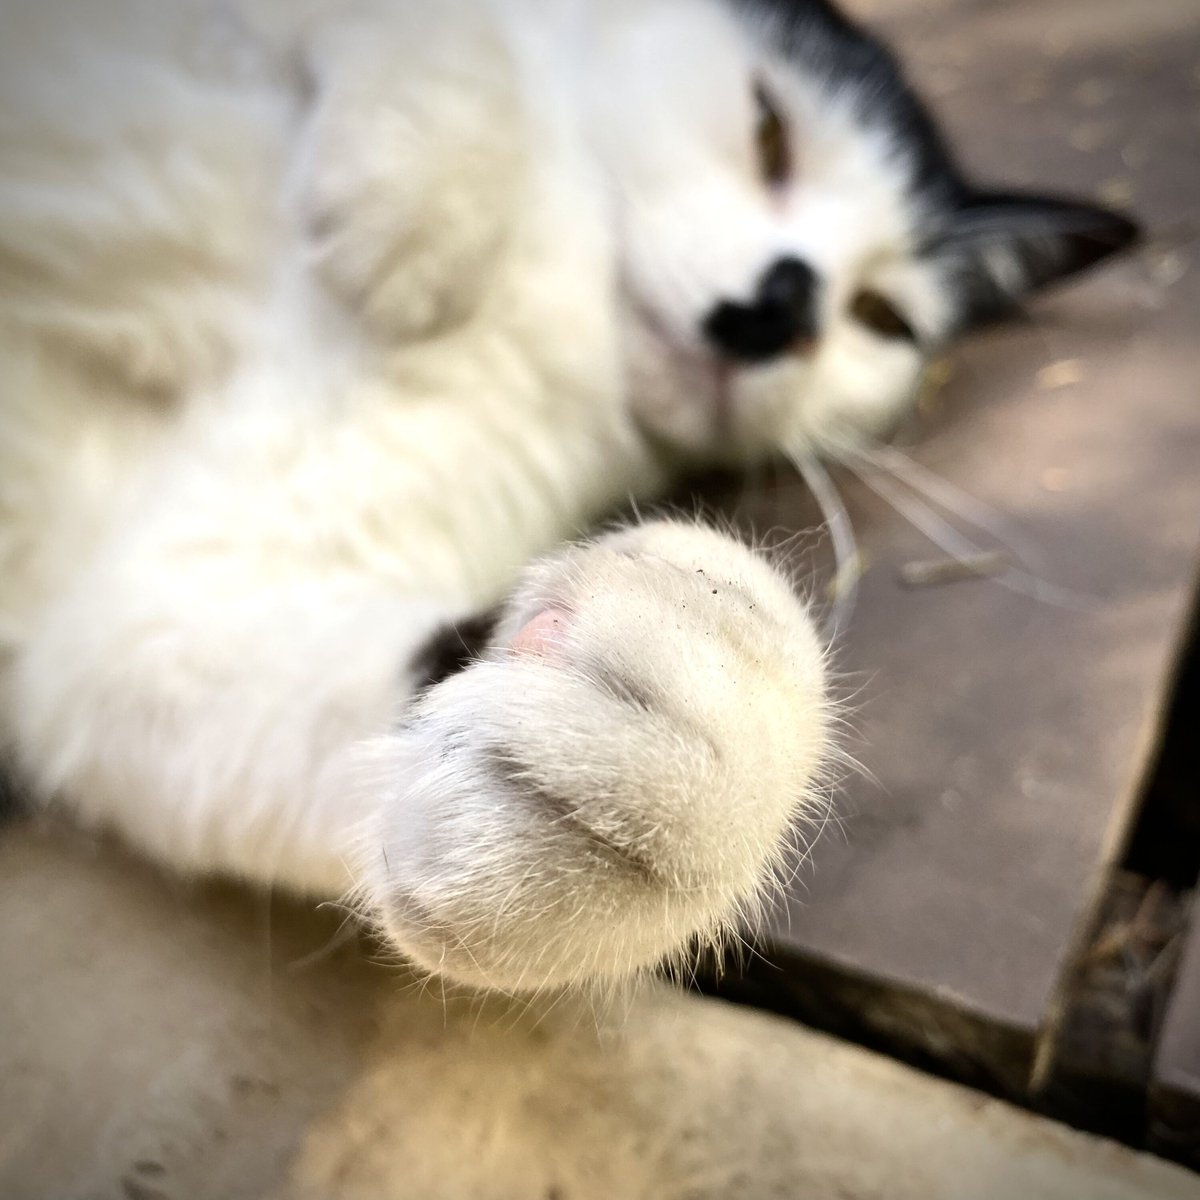 Paw bump! G'wan, you know you want to. #happycaturday, all!😻

#caturday #ilovemycat #felinelove